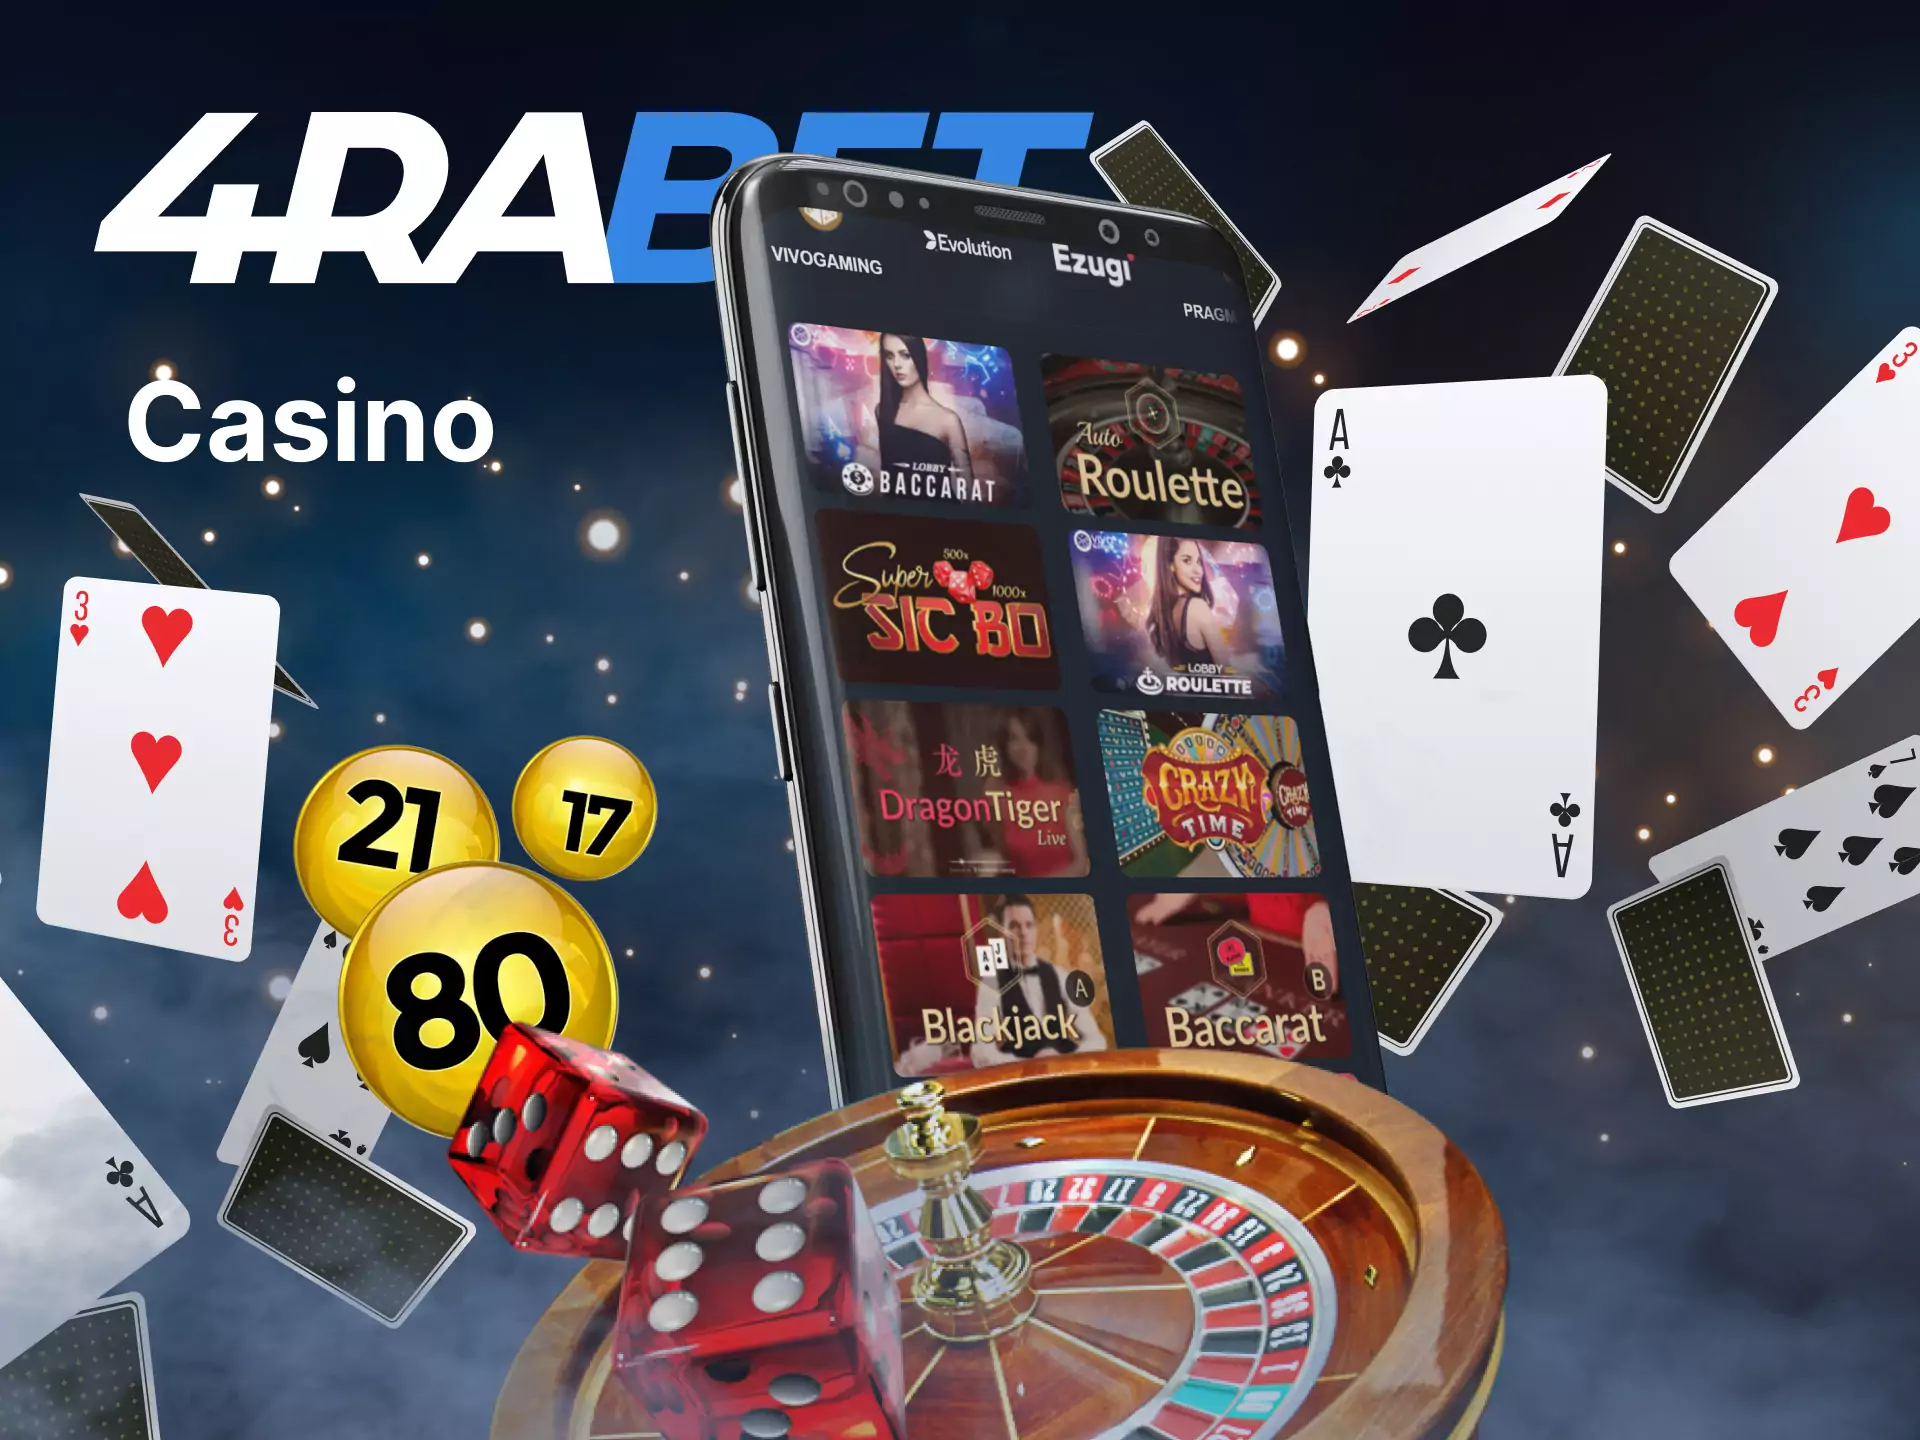 The 4rabet mobile app has a section with Casino.